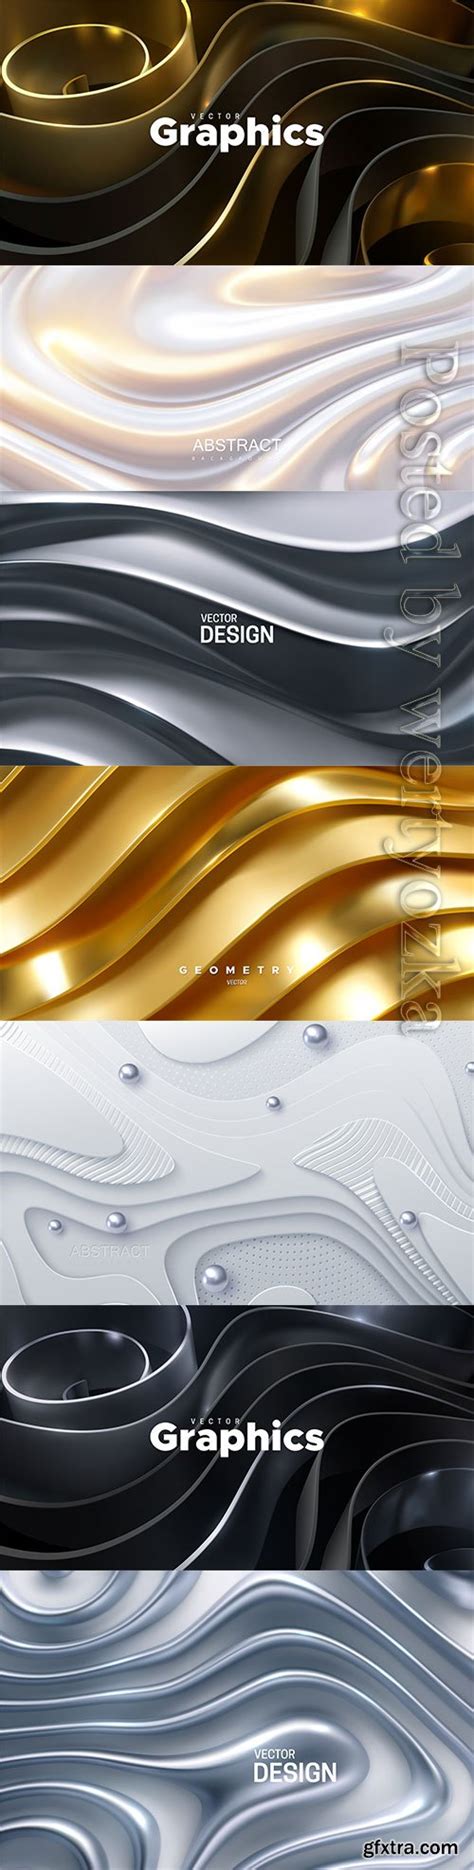 Luxury Abstract Vector Backgrounds With Golden Lines Gfxtra